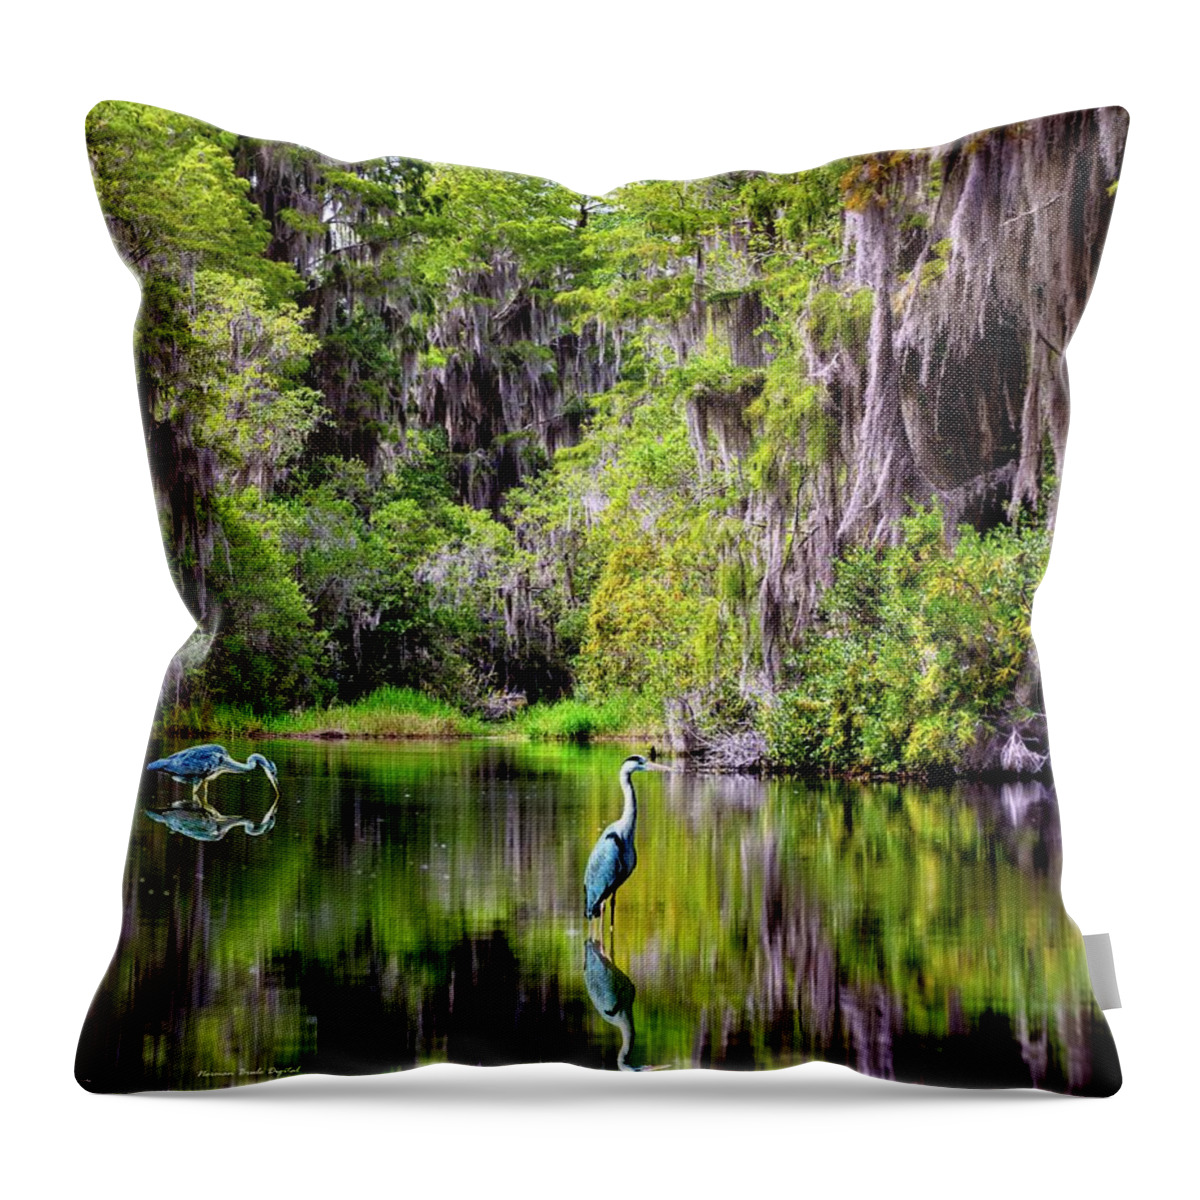 Heron Throw Pillow featuring the digital art Patient Reflections by Norman Brule